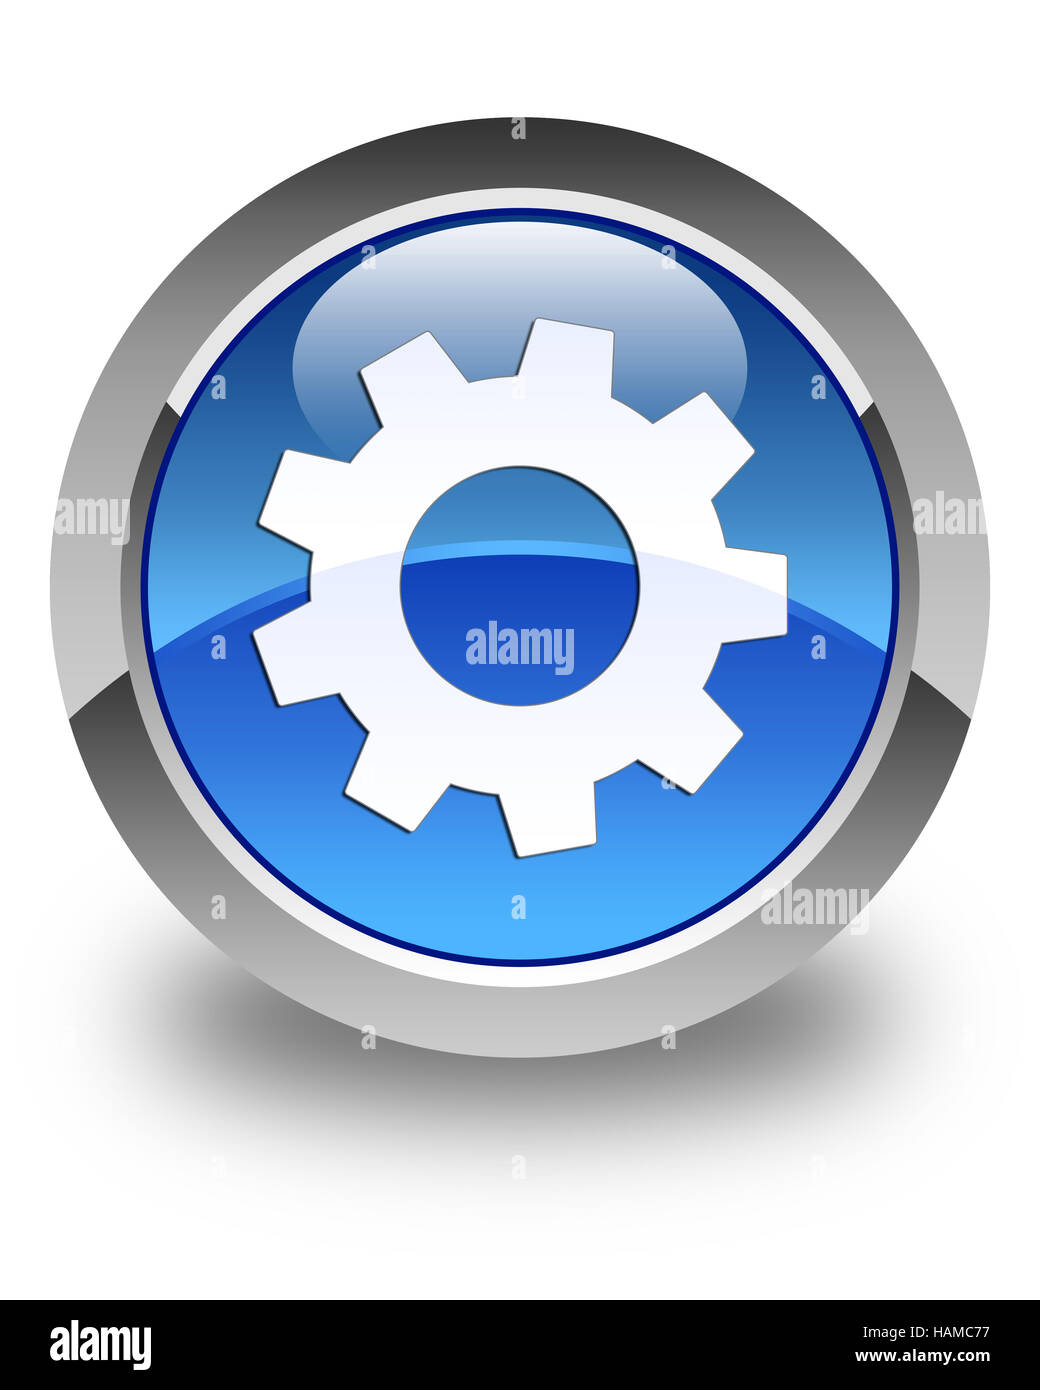 Process icon isolated on glossy blue round button abstract illustration Stock Photo